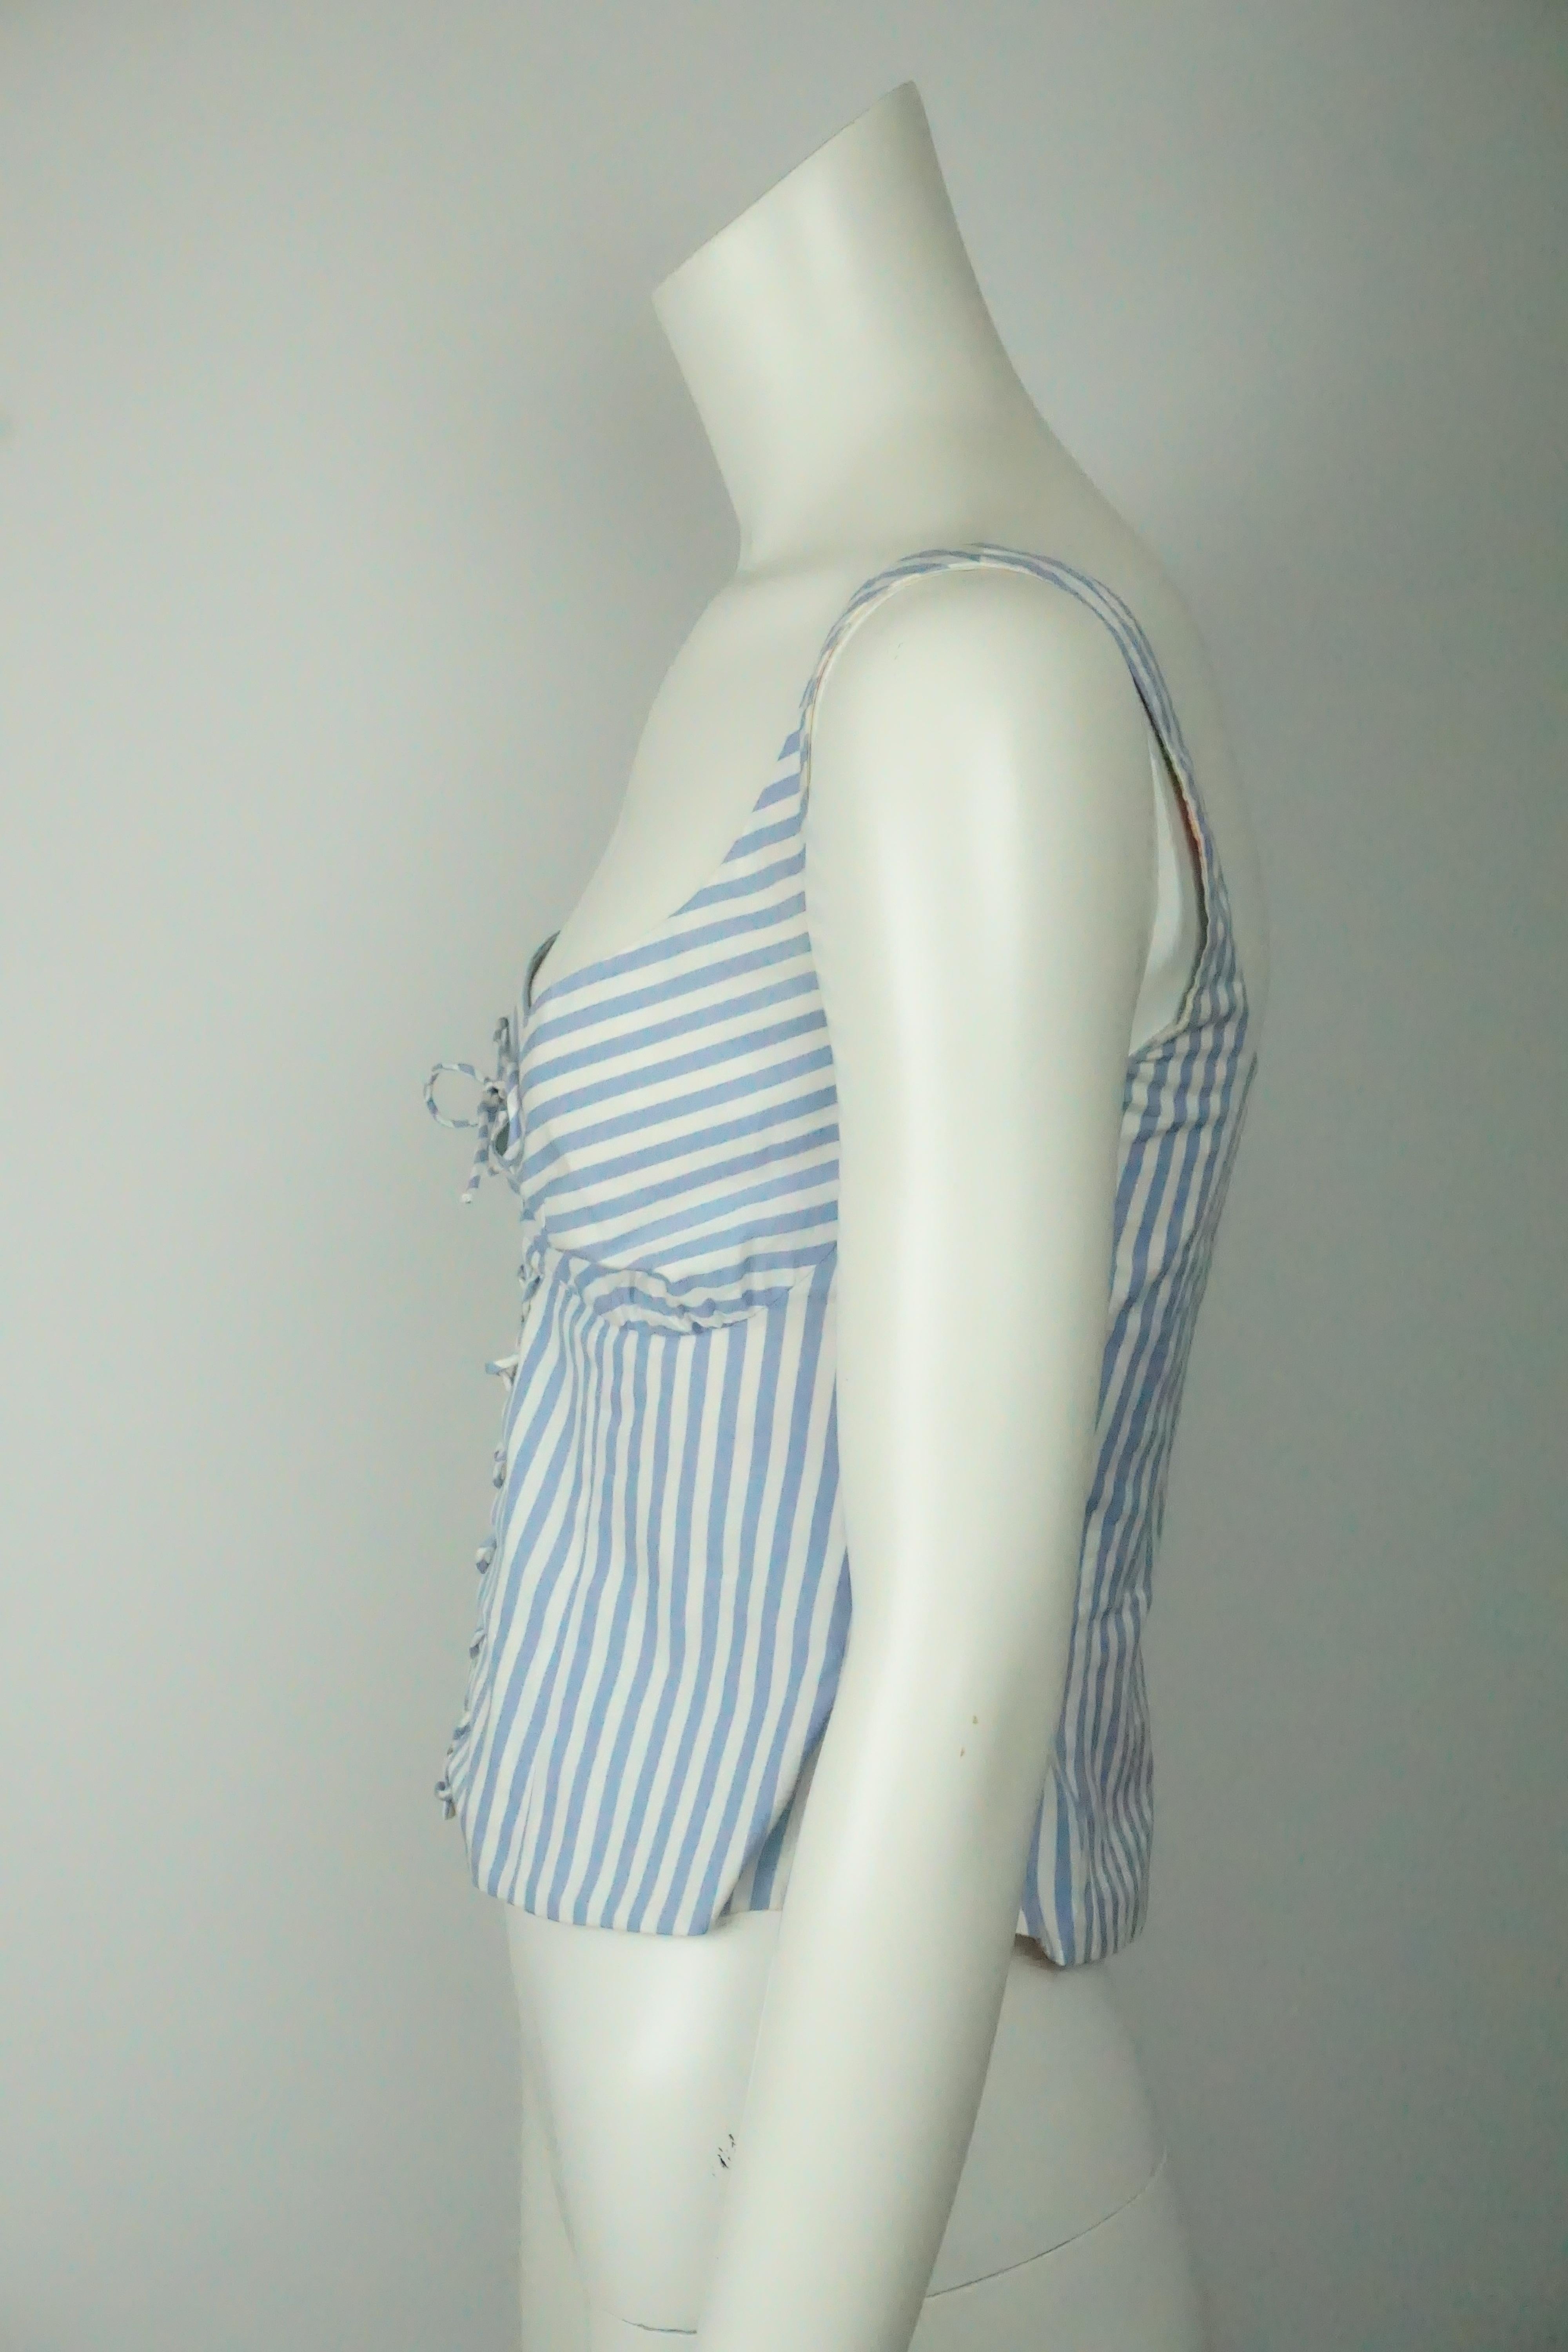 Ralph Lauren BL Blue and White Striped Bustier Crop Top - 2    This adorable top is in excellent condition. There is a small stain on the back of the top that is hardly recognizable. The top is a bustier style top that has front lacing and ties on